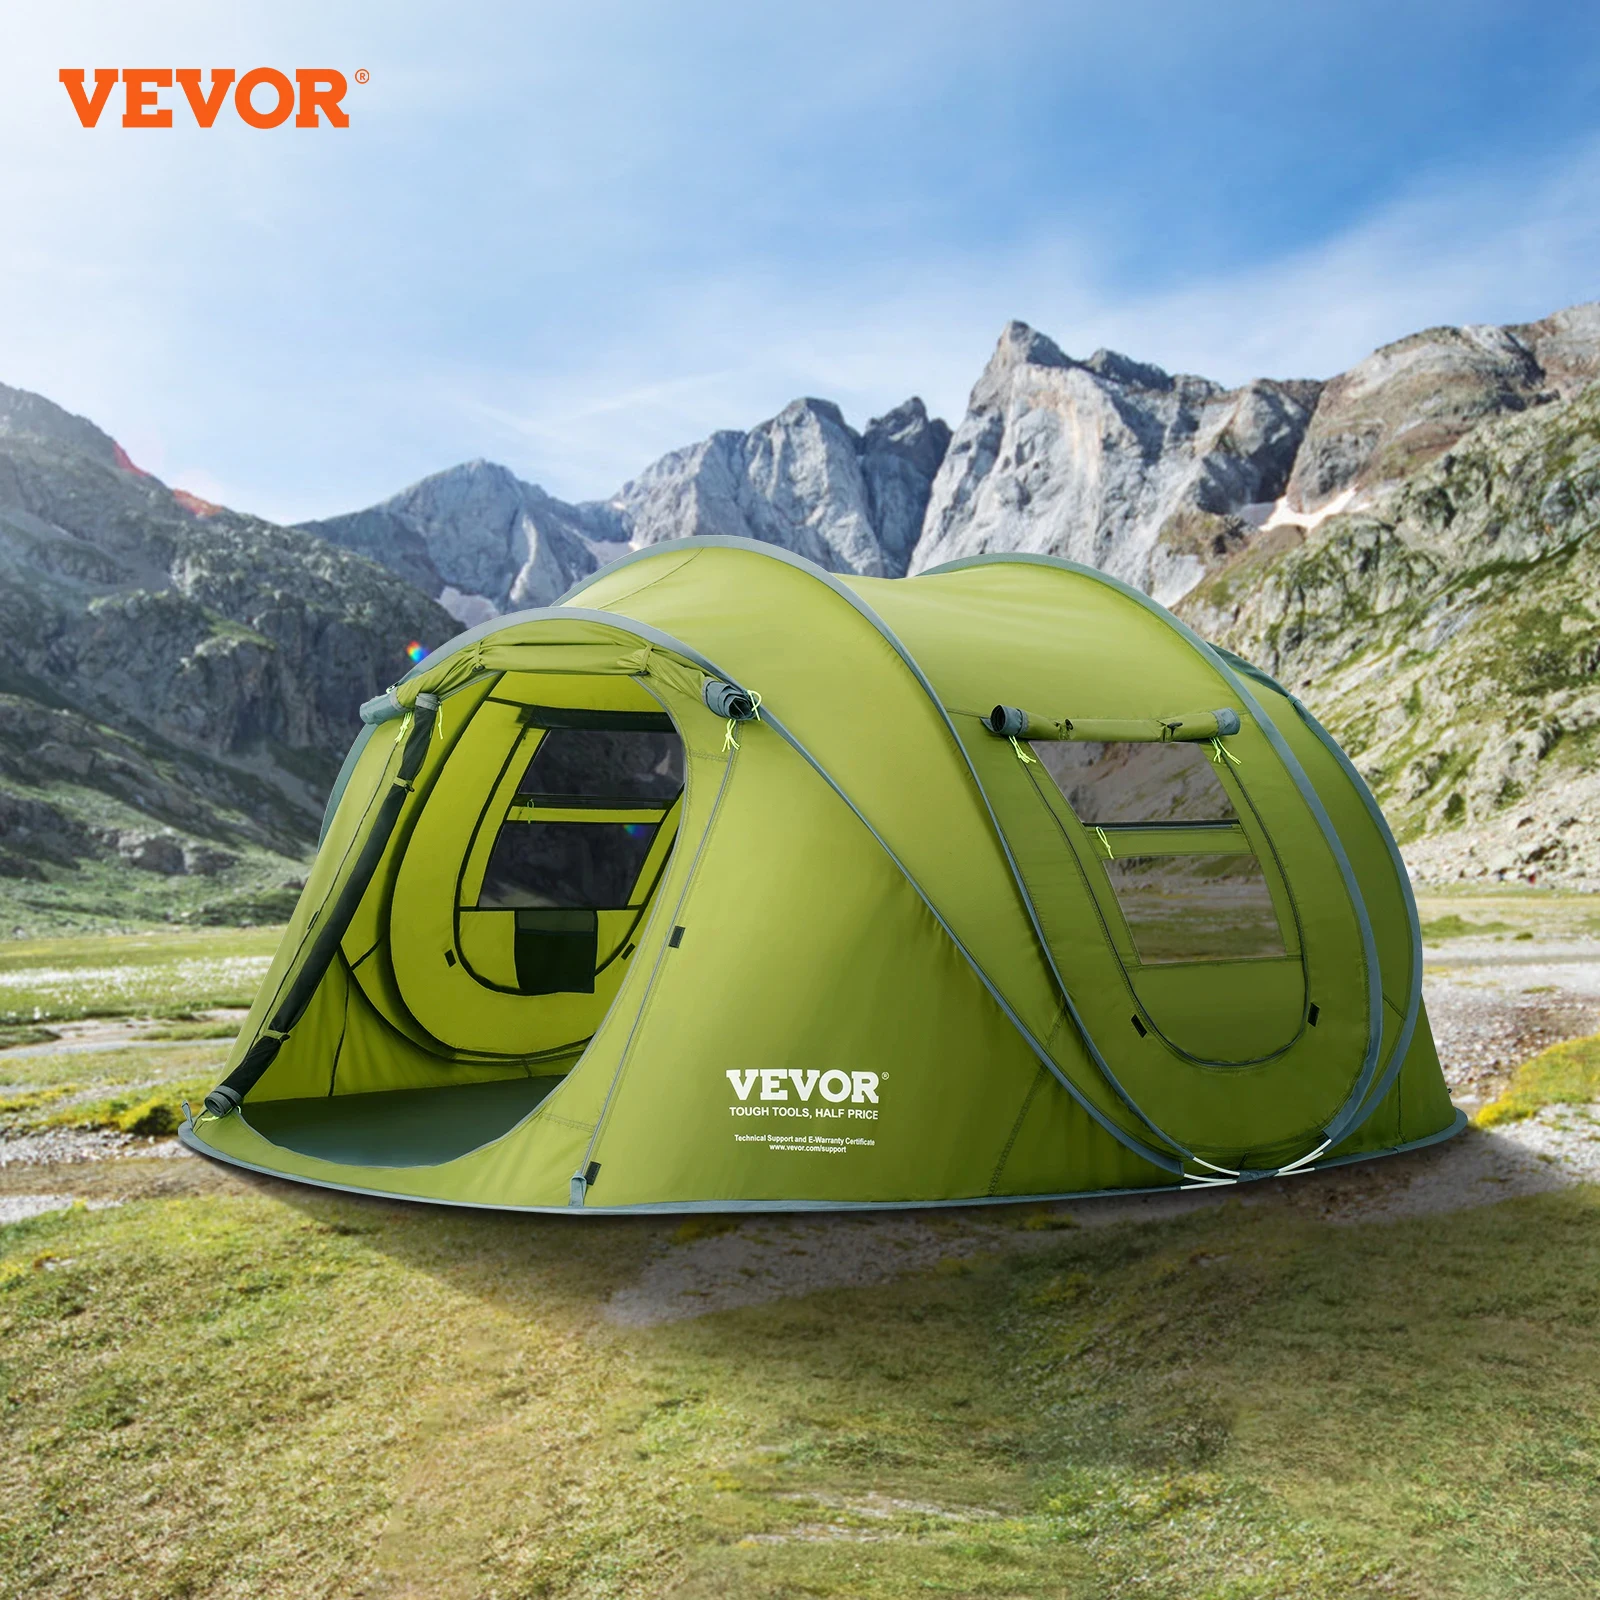 

VEVOR Outdoor Camping Tent Pop-Up Tents for 4 Person Easy Setup Waterproof Backpacking Tent for Family Camping Hiking Hunting